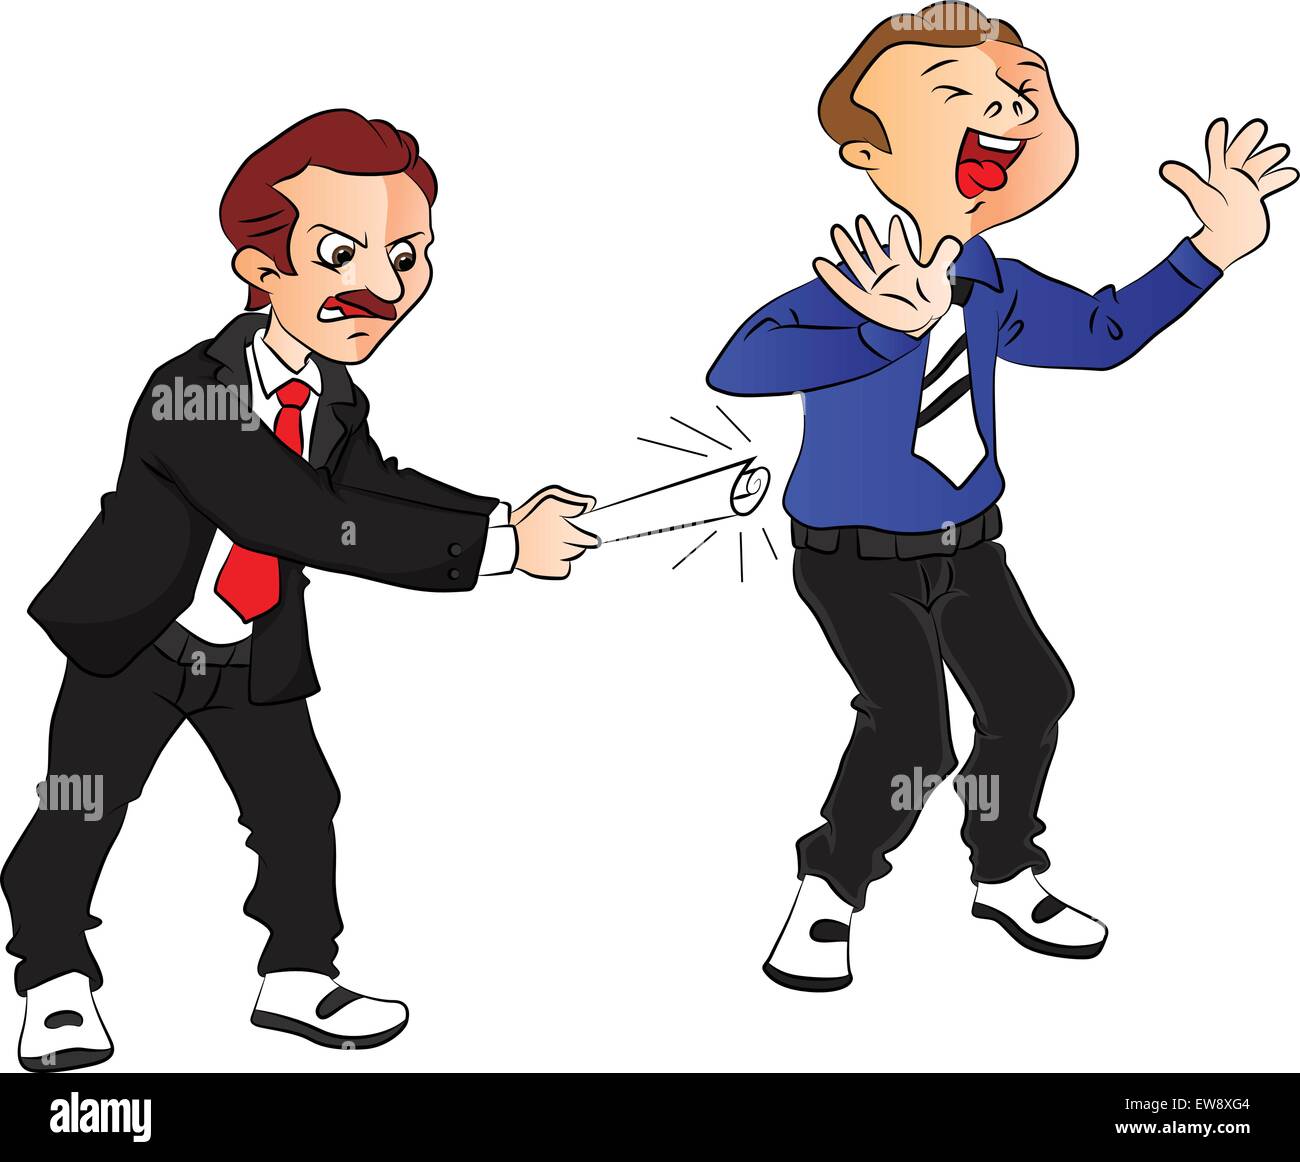 Vector illustration of angry boss hitting scared employee at office. Stock Vector